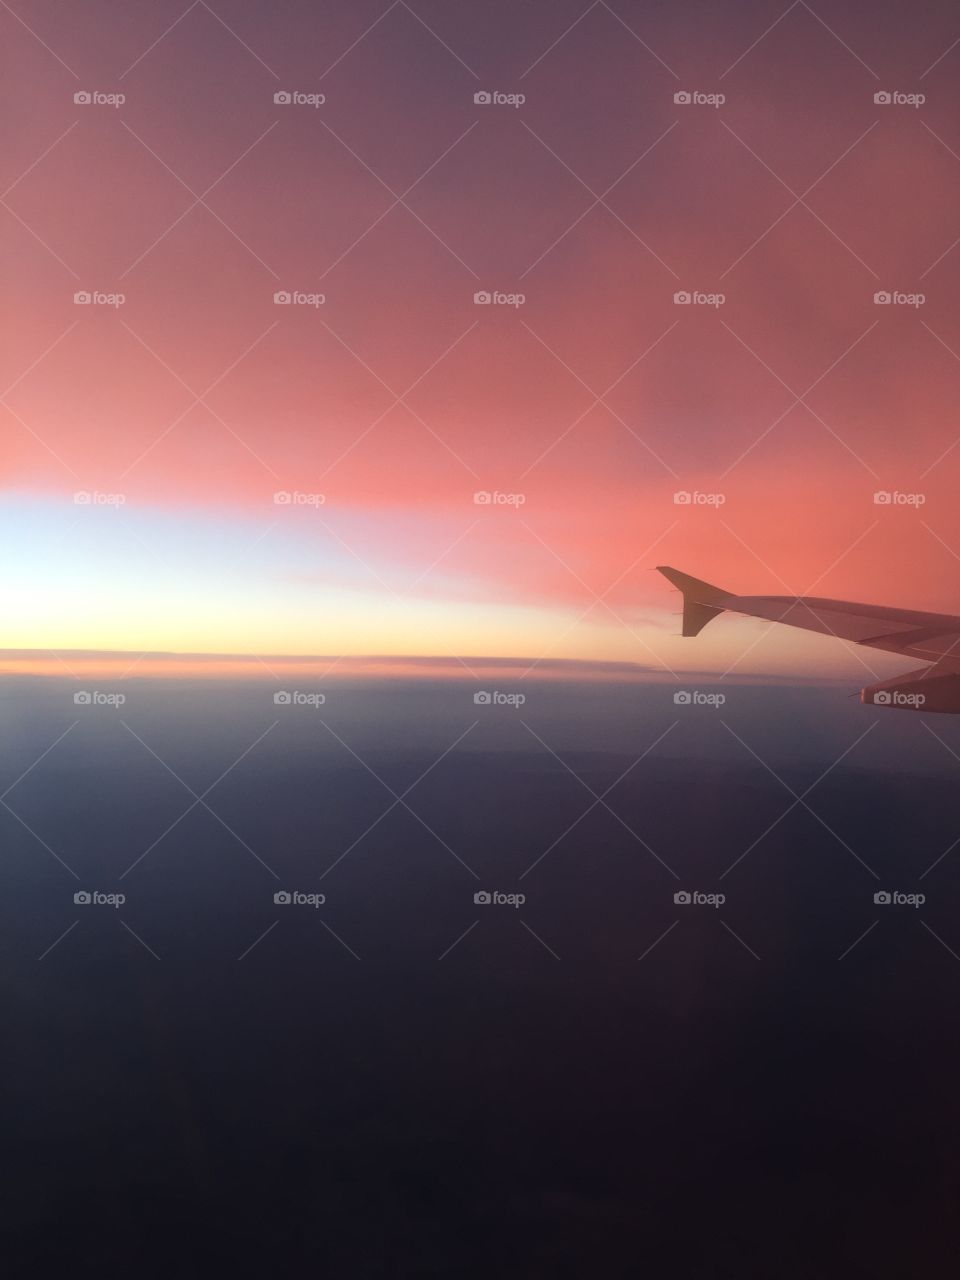 Sunset, No Person, Airplane, Sky, Travel